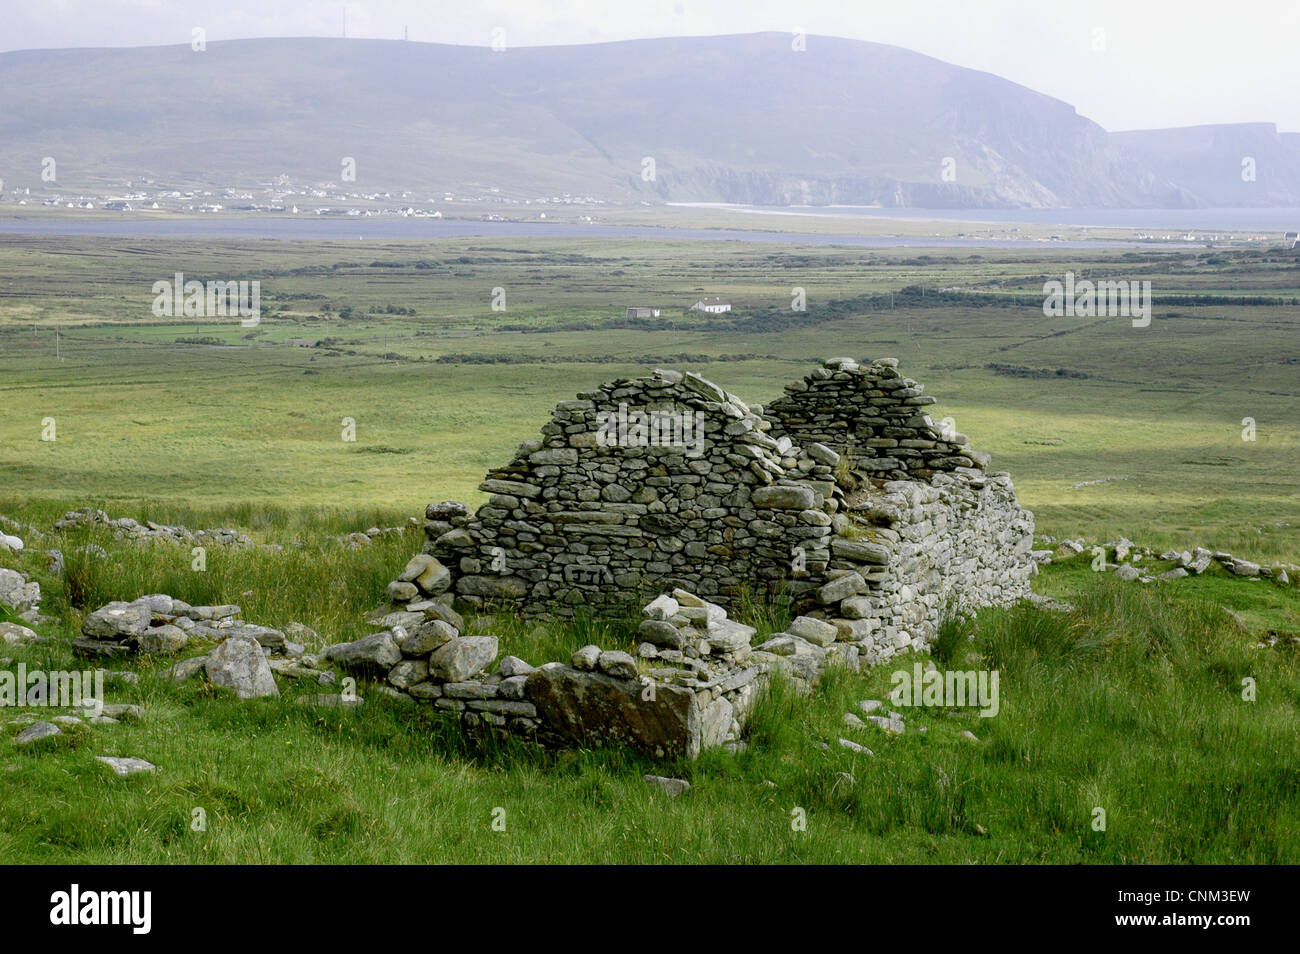 A CHARACTERISTIC RUIN OF A DESERTED COTTAGE ABANDONED DURING THE GREAT IRISH FAMINE (1840'S). Achill Island. Stock Photo